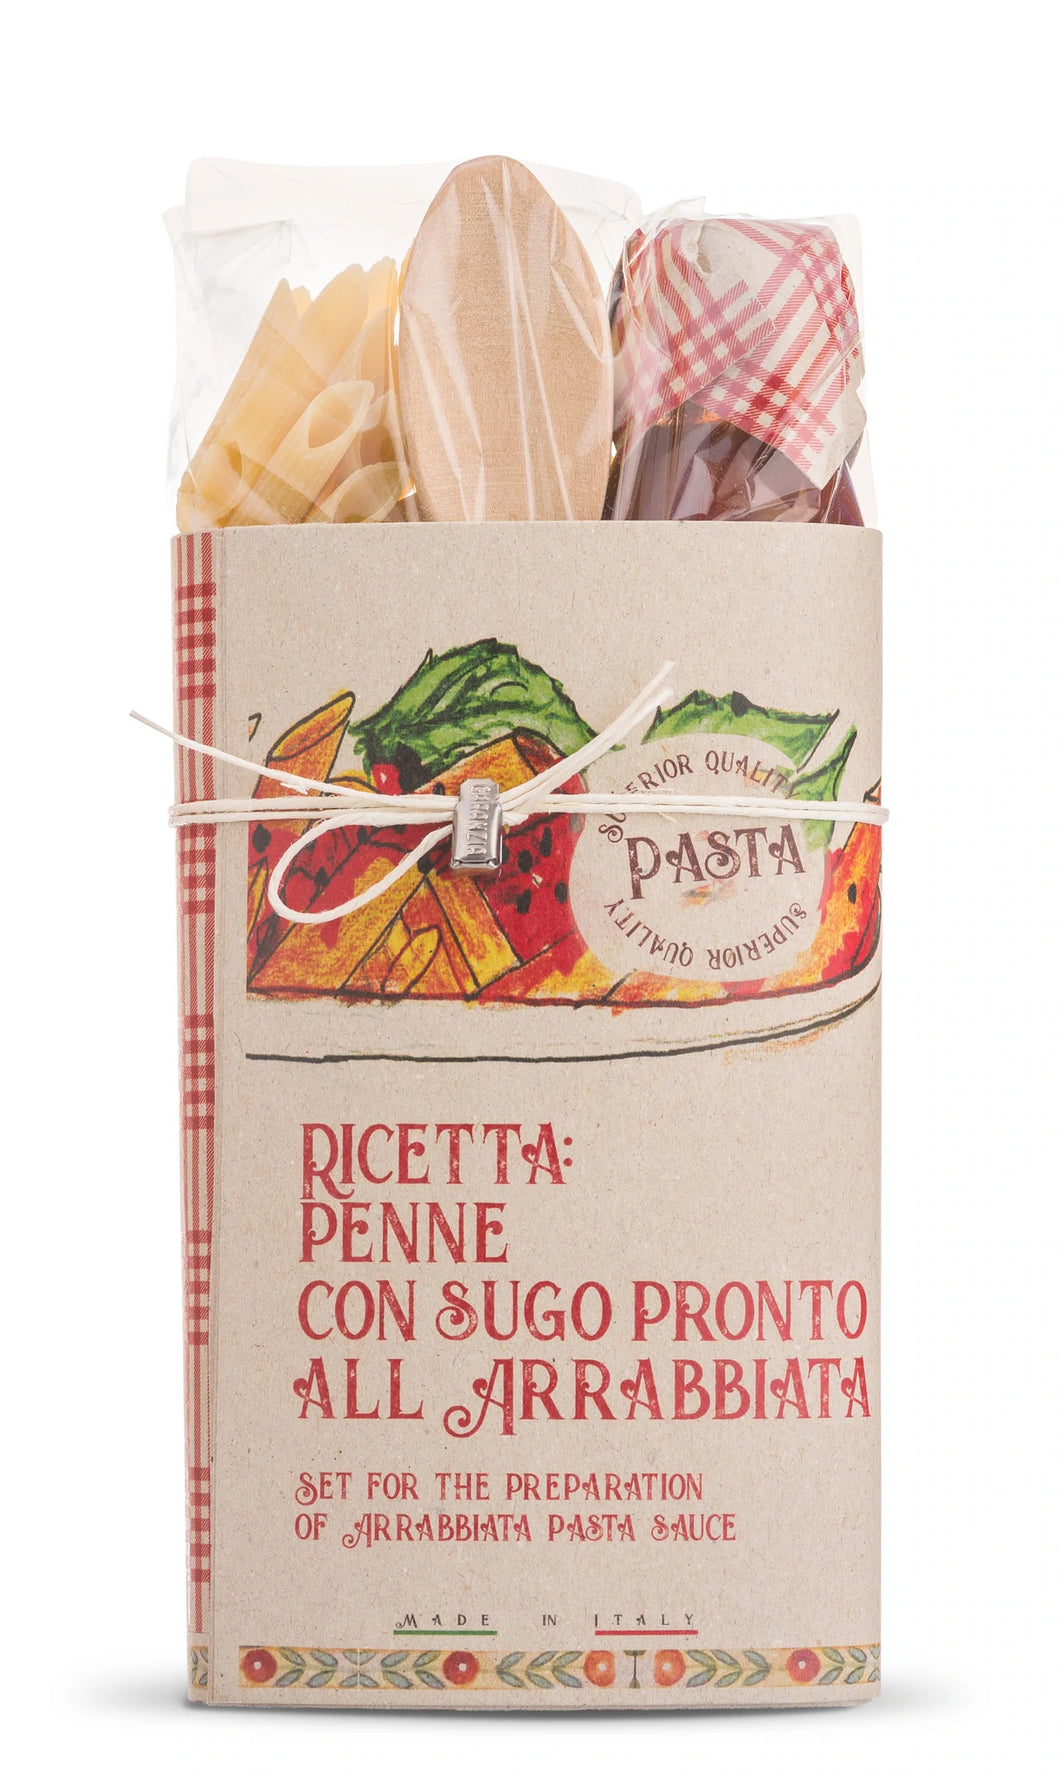 Organic Penne Pasta Arrabbiata Sauce gift set with wooden spoon by 